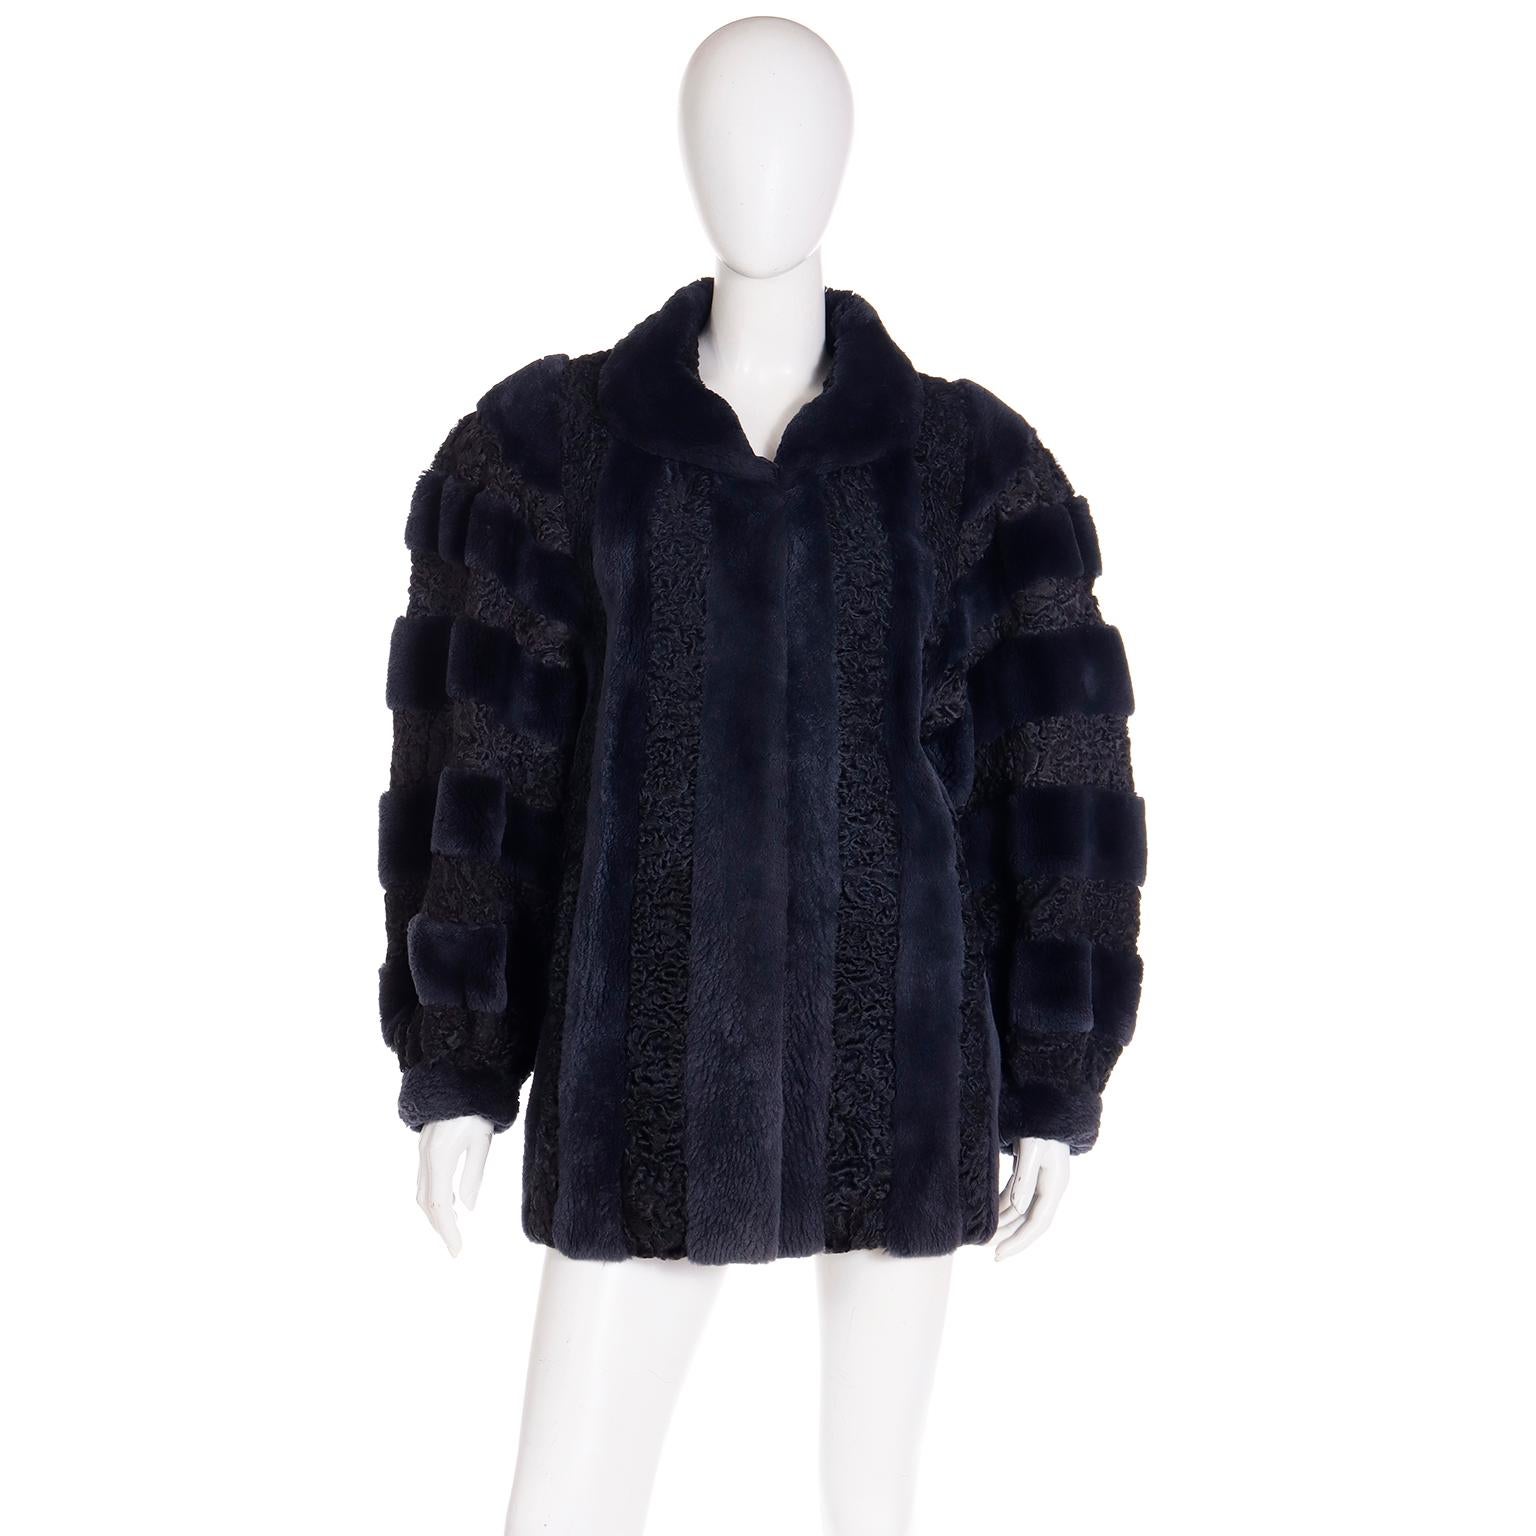 Christian Dior Fourrure 1980s Vintage Blue Dyed Sheared Fur & Lambswool Jacket In Excellent Condition For Sale In Portland, OR